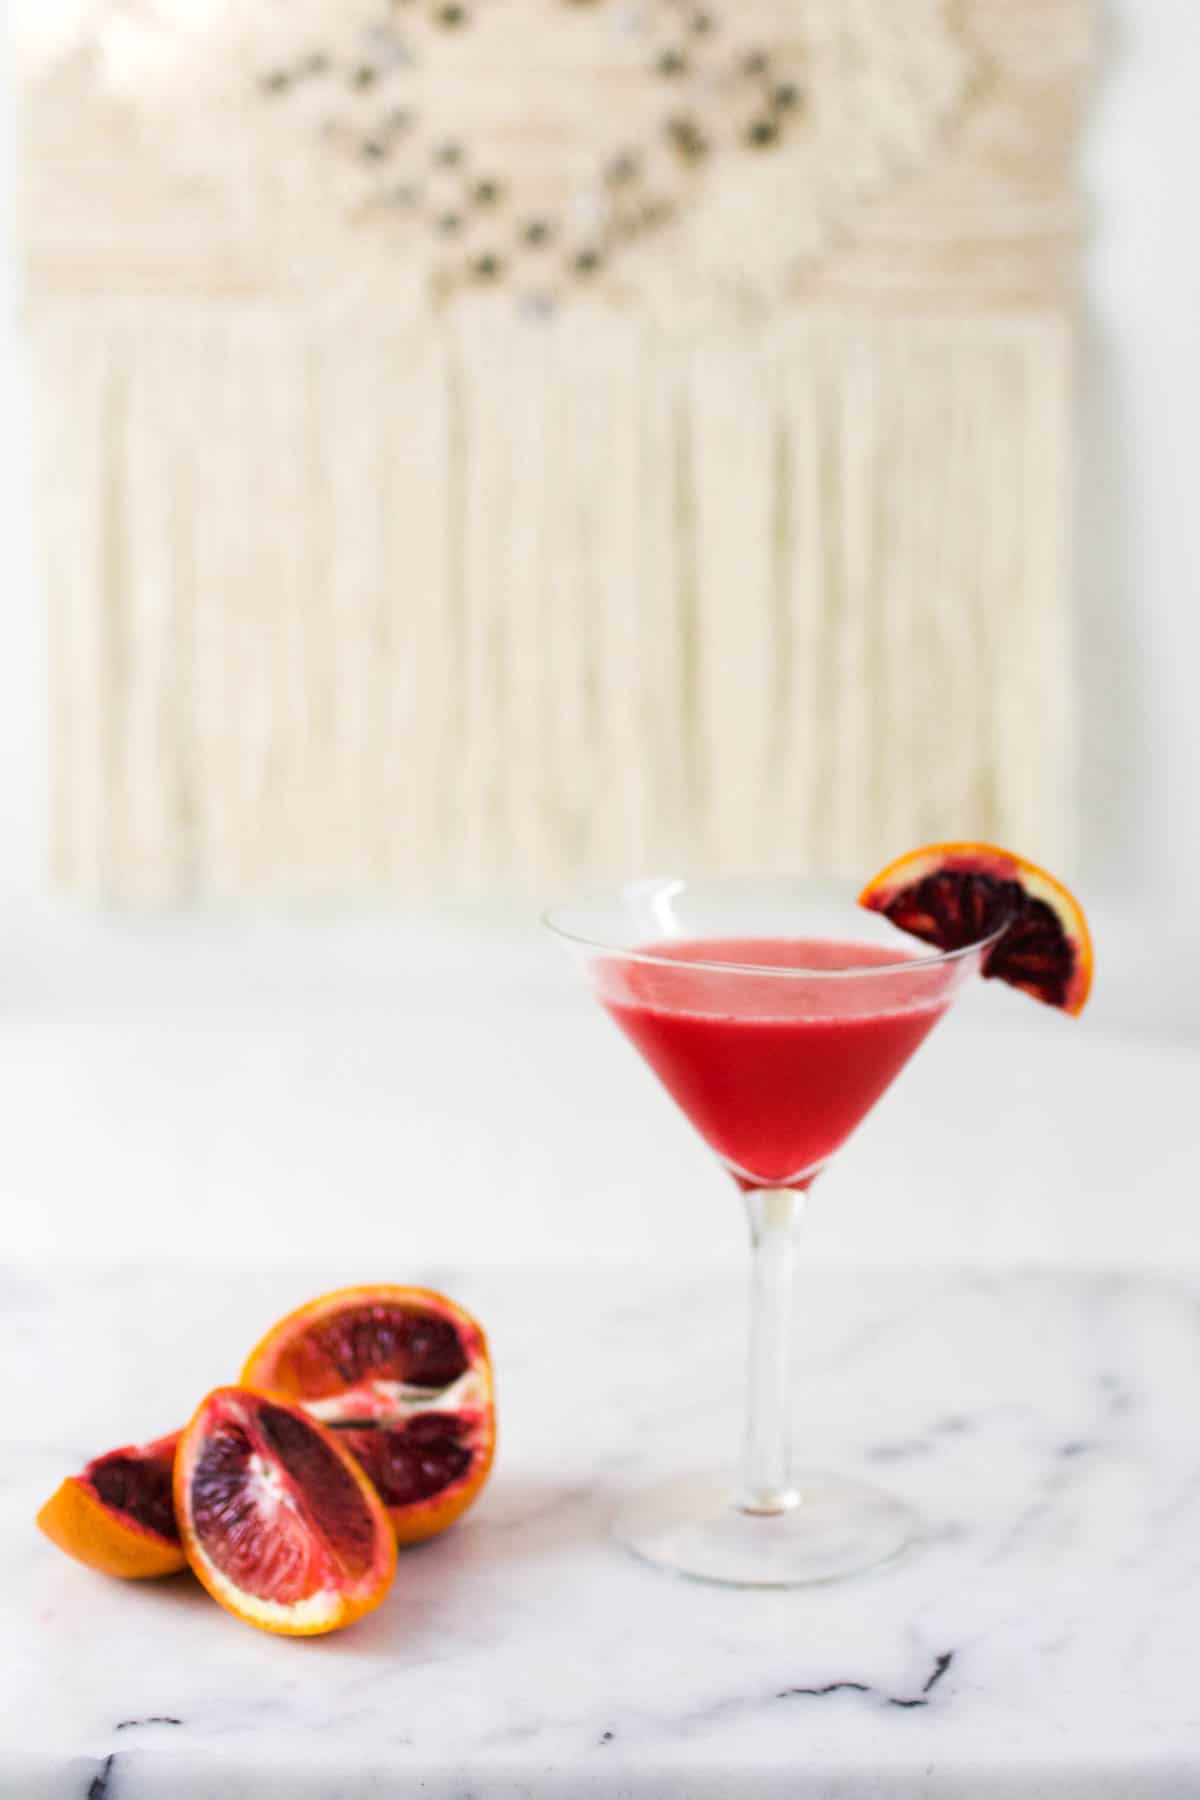 A blood orange vodka cocktail in a martini glass on a table.